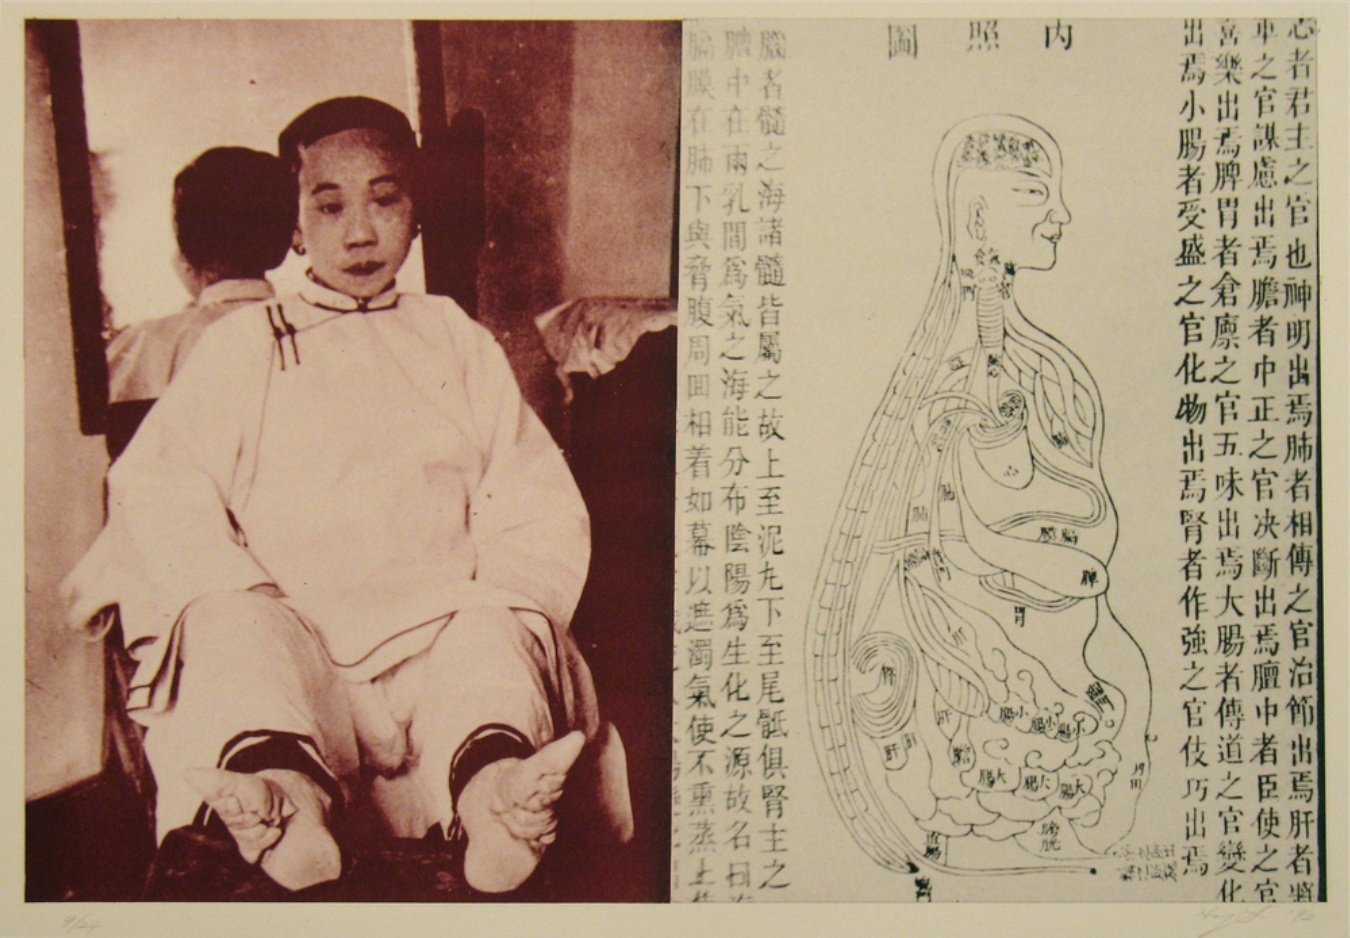 A sepia-toned photograph of an Asian person with deformed feet sits alongside a diagram of the human body flanked by texts in an Asian language